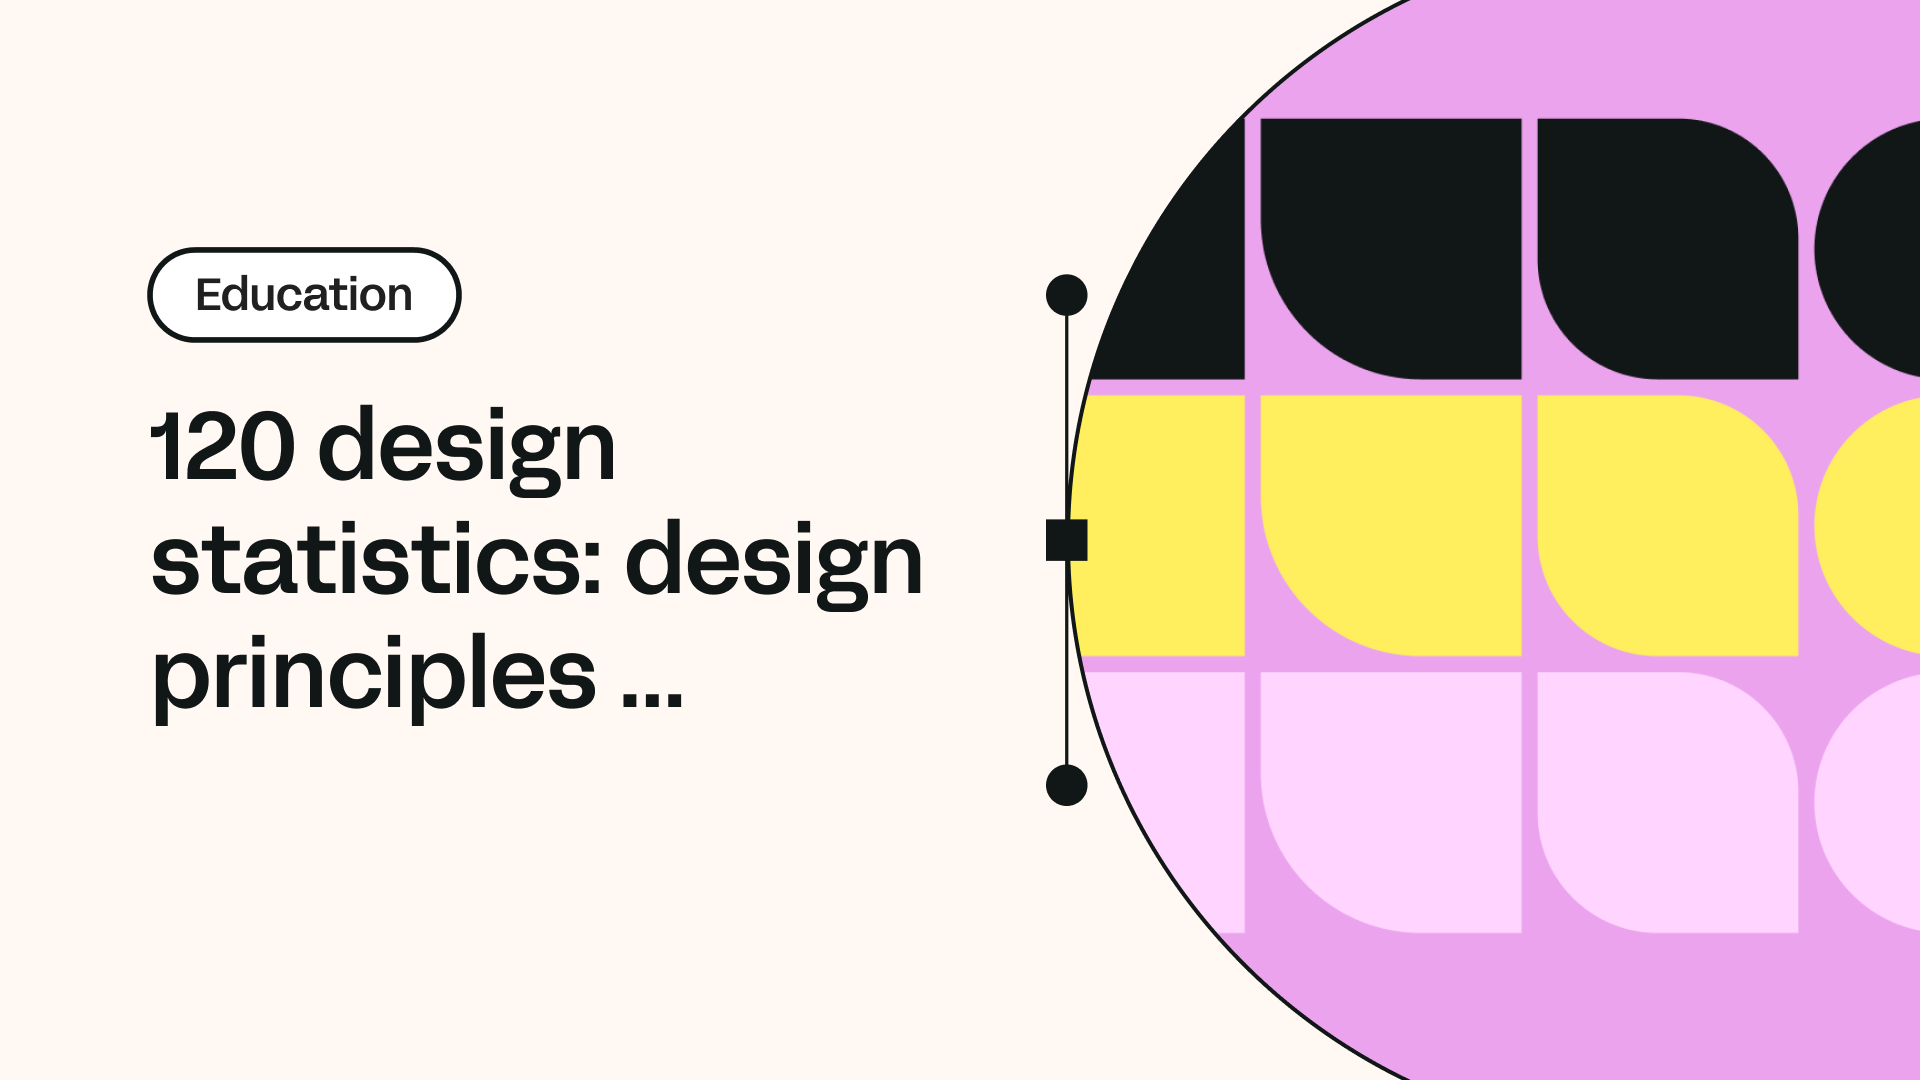 120 design statistics: design principles, technological trends, and sustainable design | Linearity